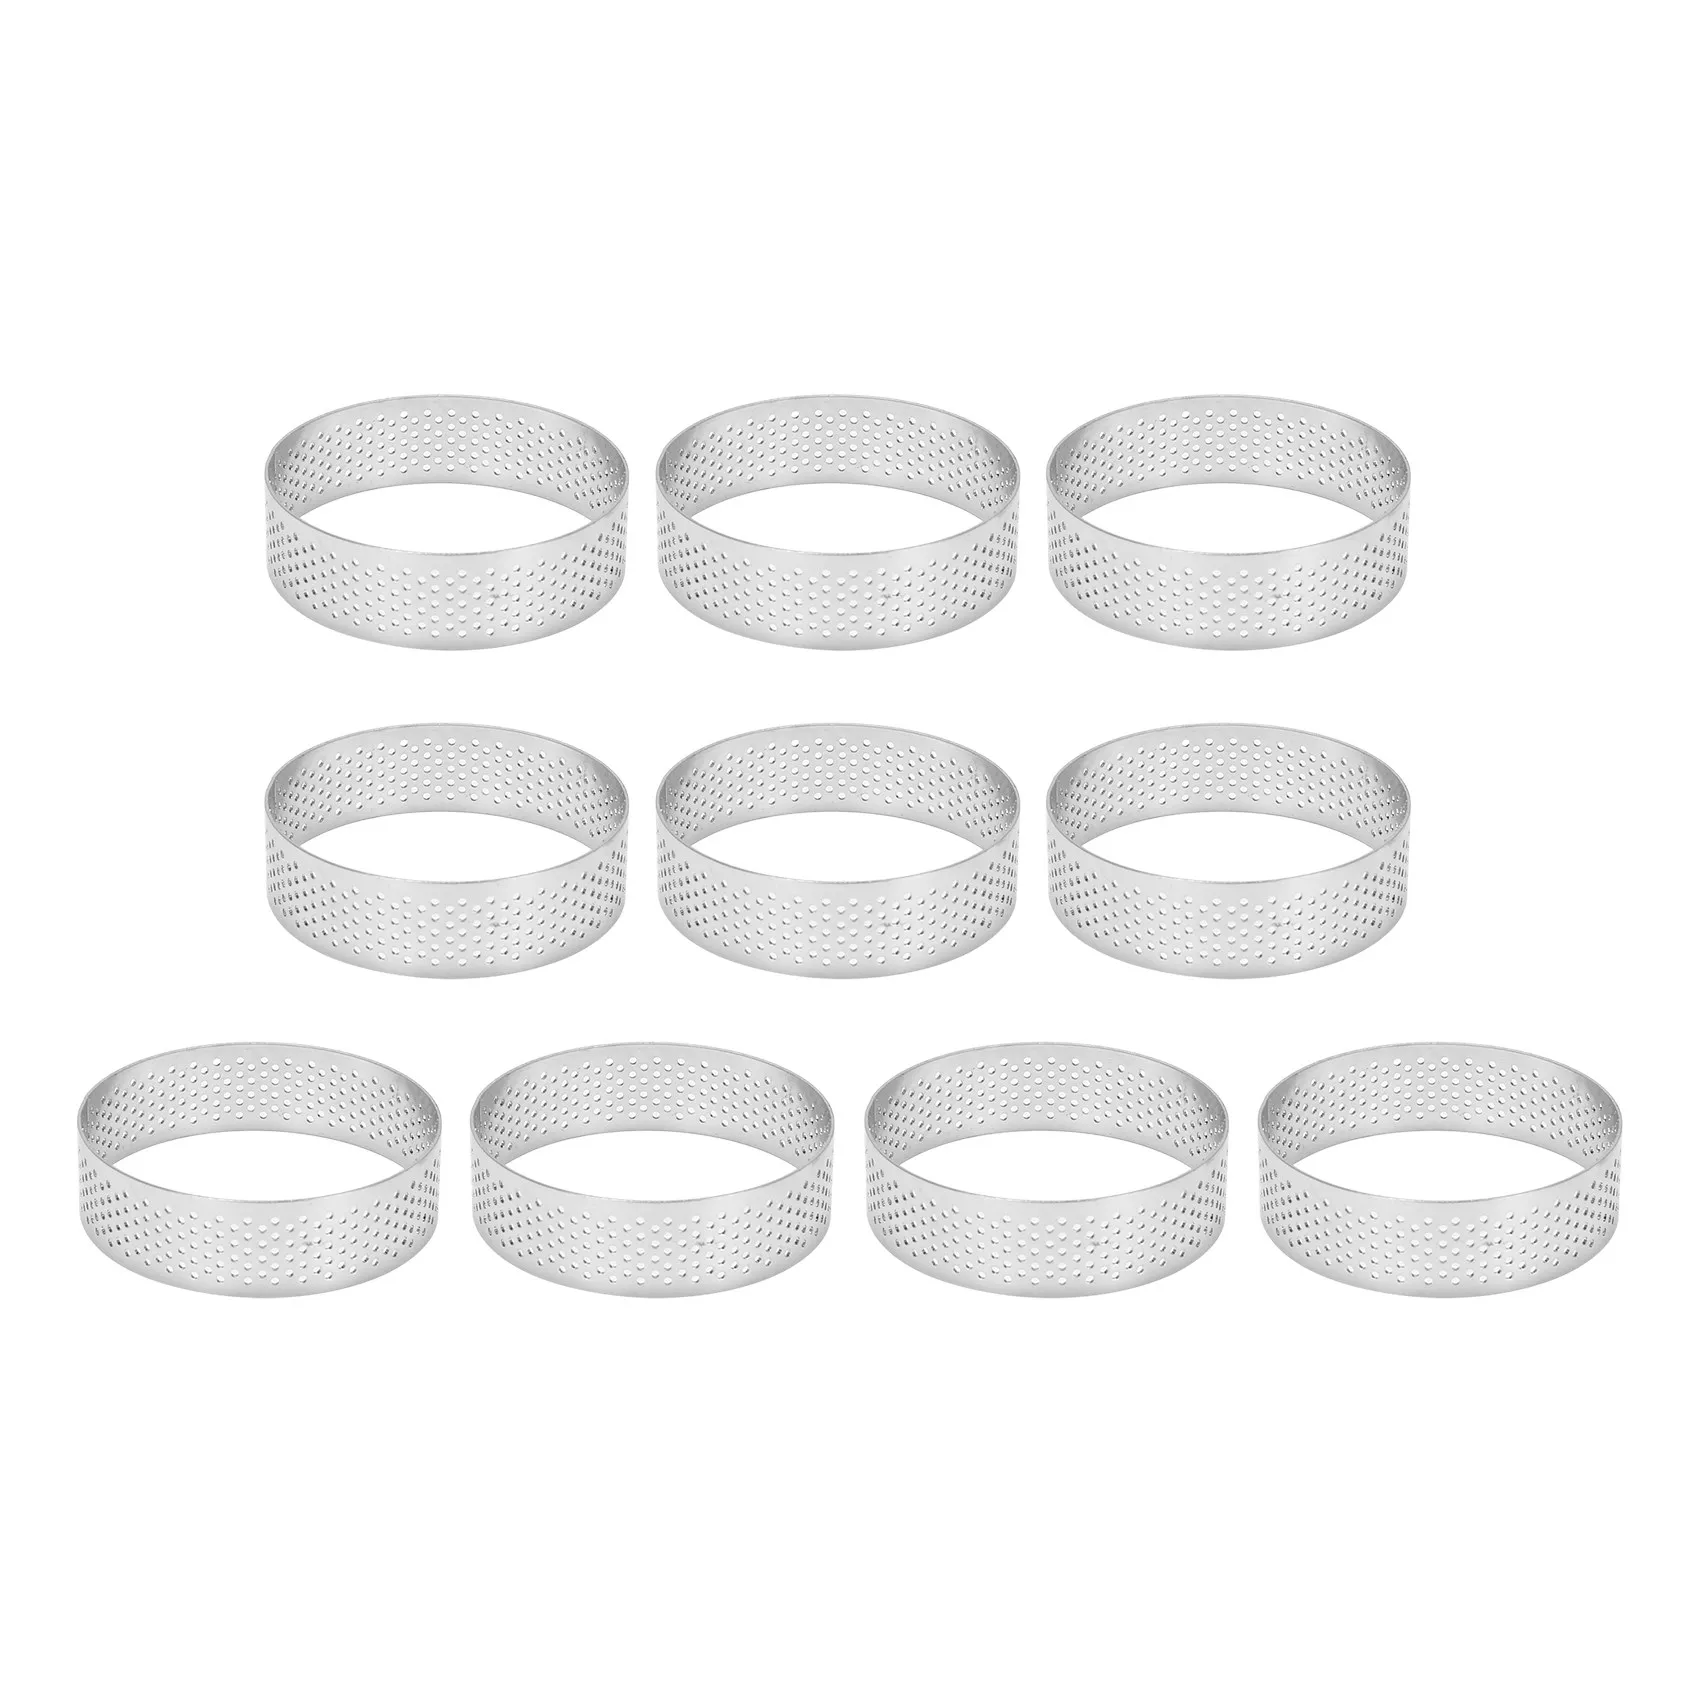 10Pcs Circular Tart Rings with Holes Stainless Steel Fruit Pie Quiches Cake Mousse Mold Kitchen Baking Mould 7cm